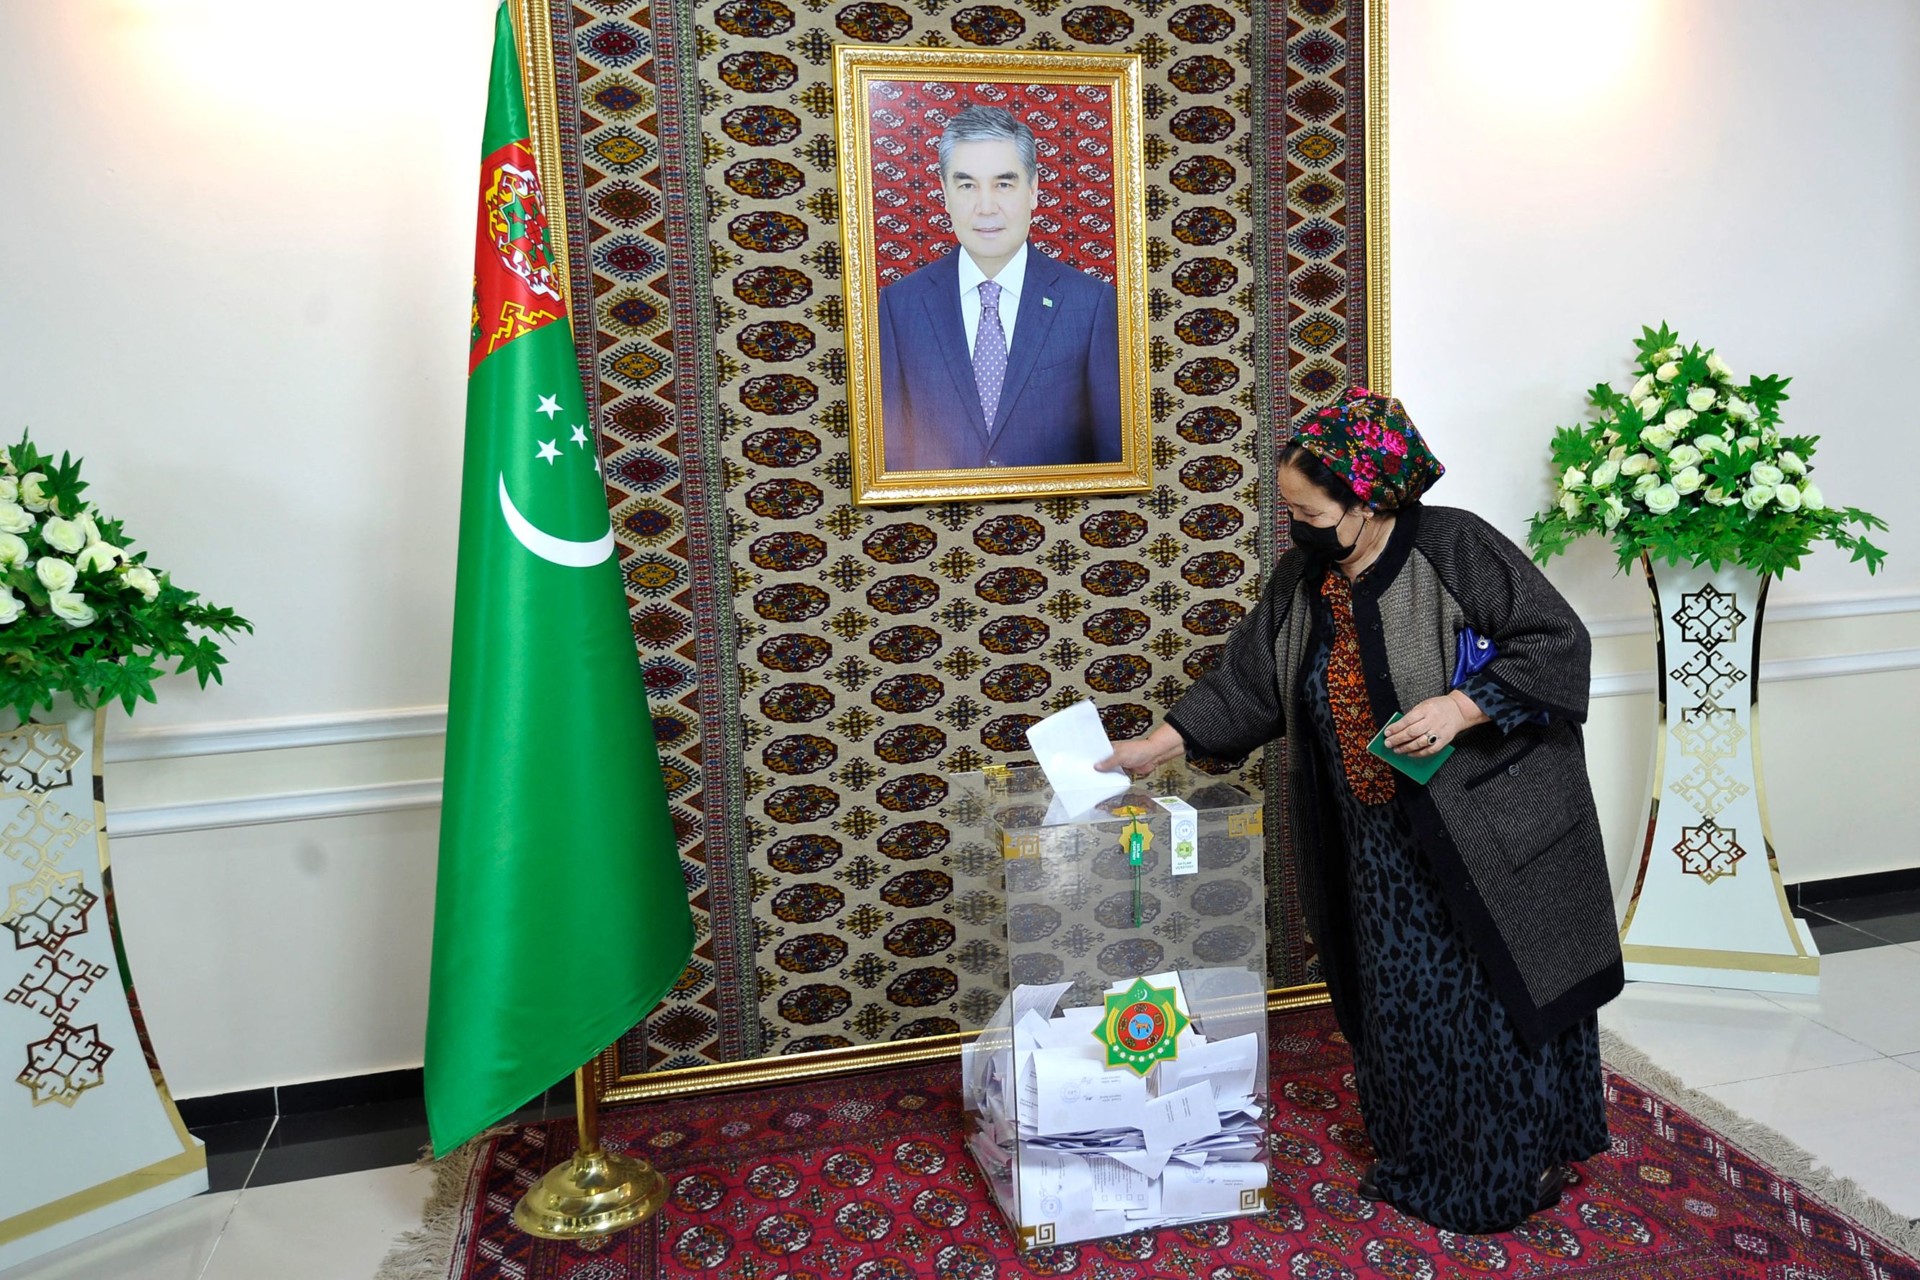 A New President Could Change Turkmenistan’s Export Prospects